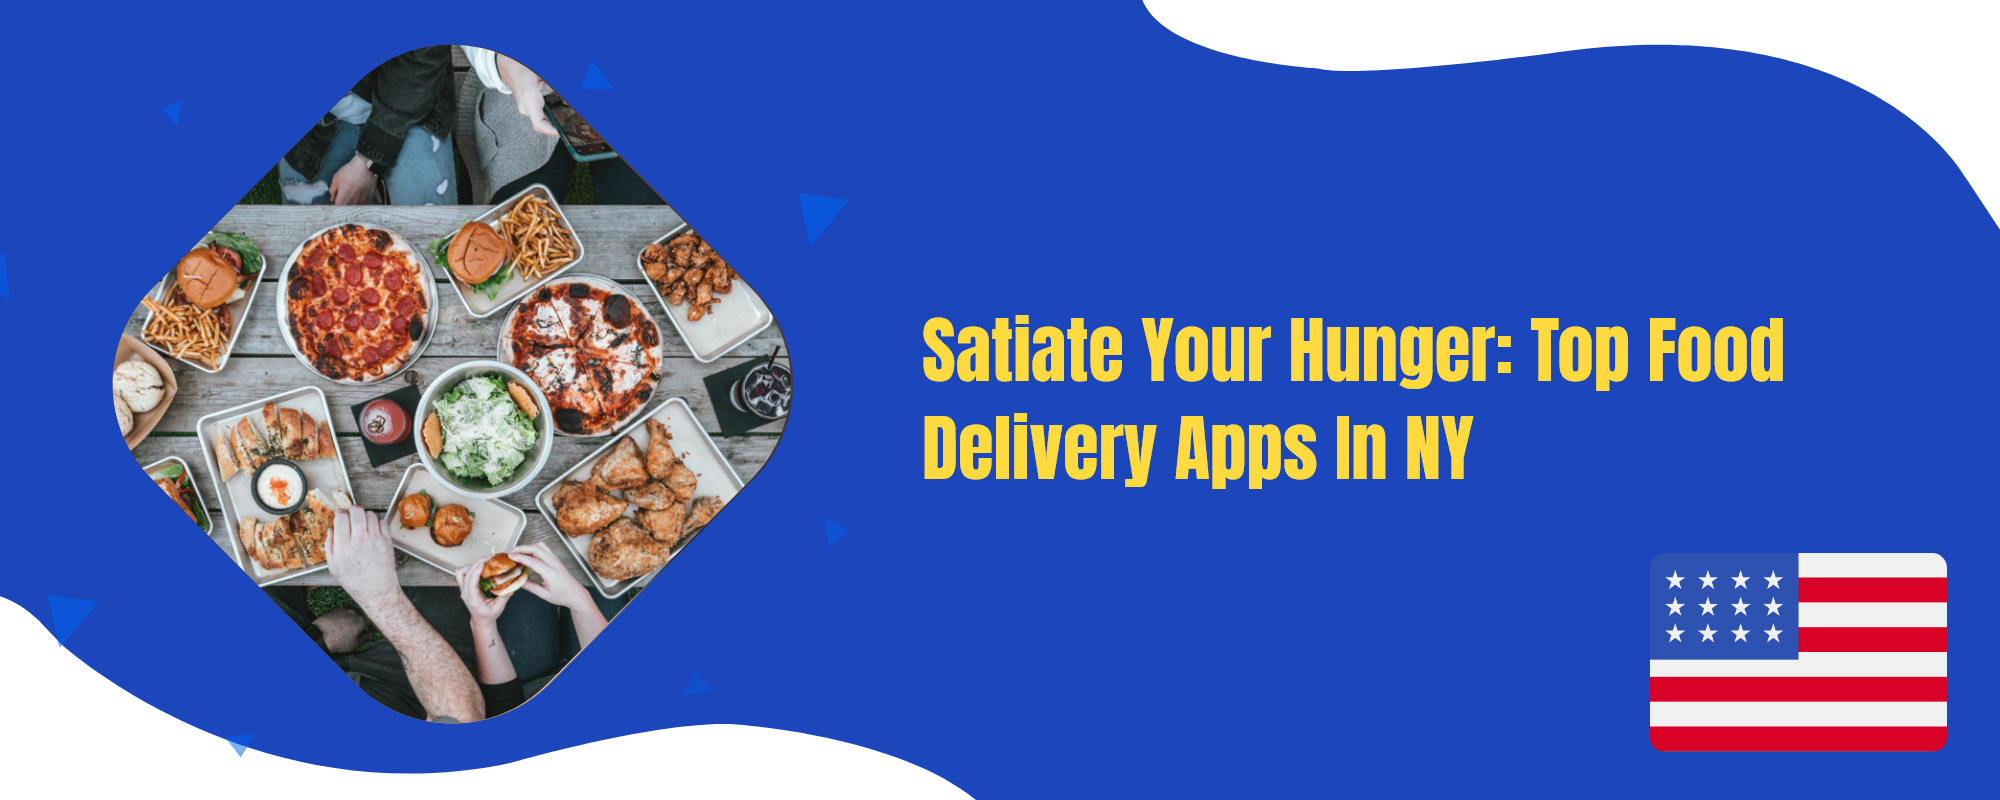 Top food delivery apps in NY